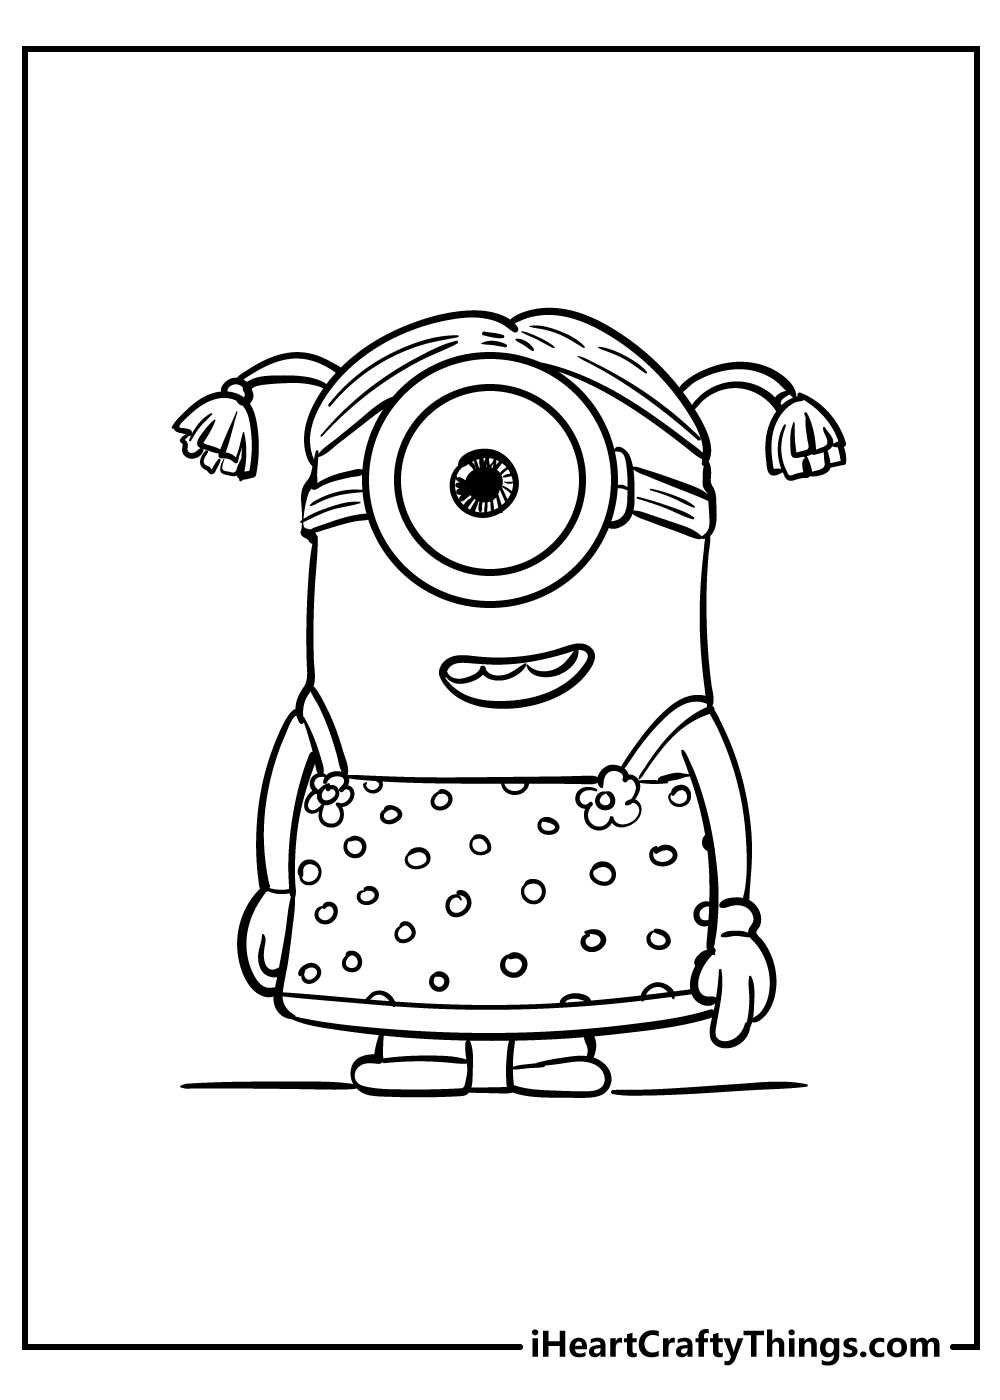 Minions Coloring Book for adults free download